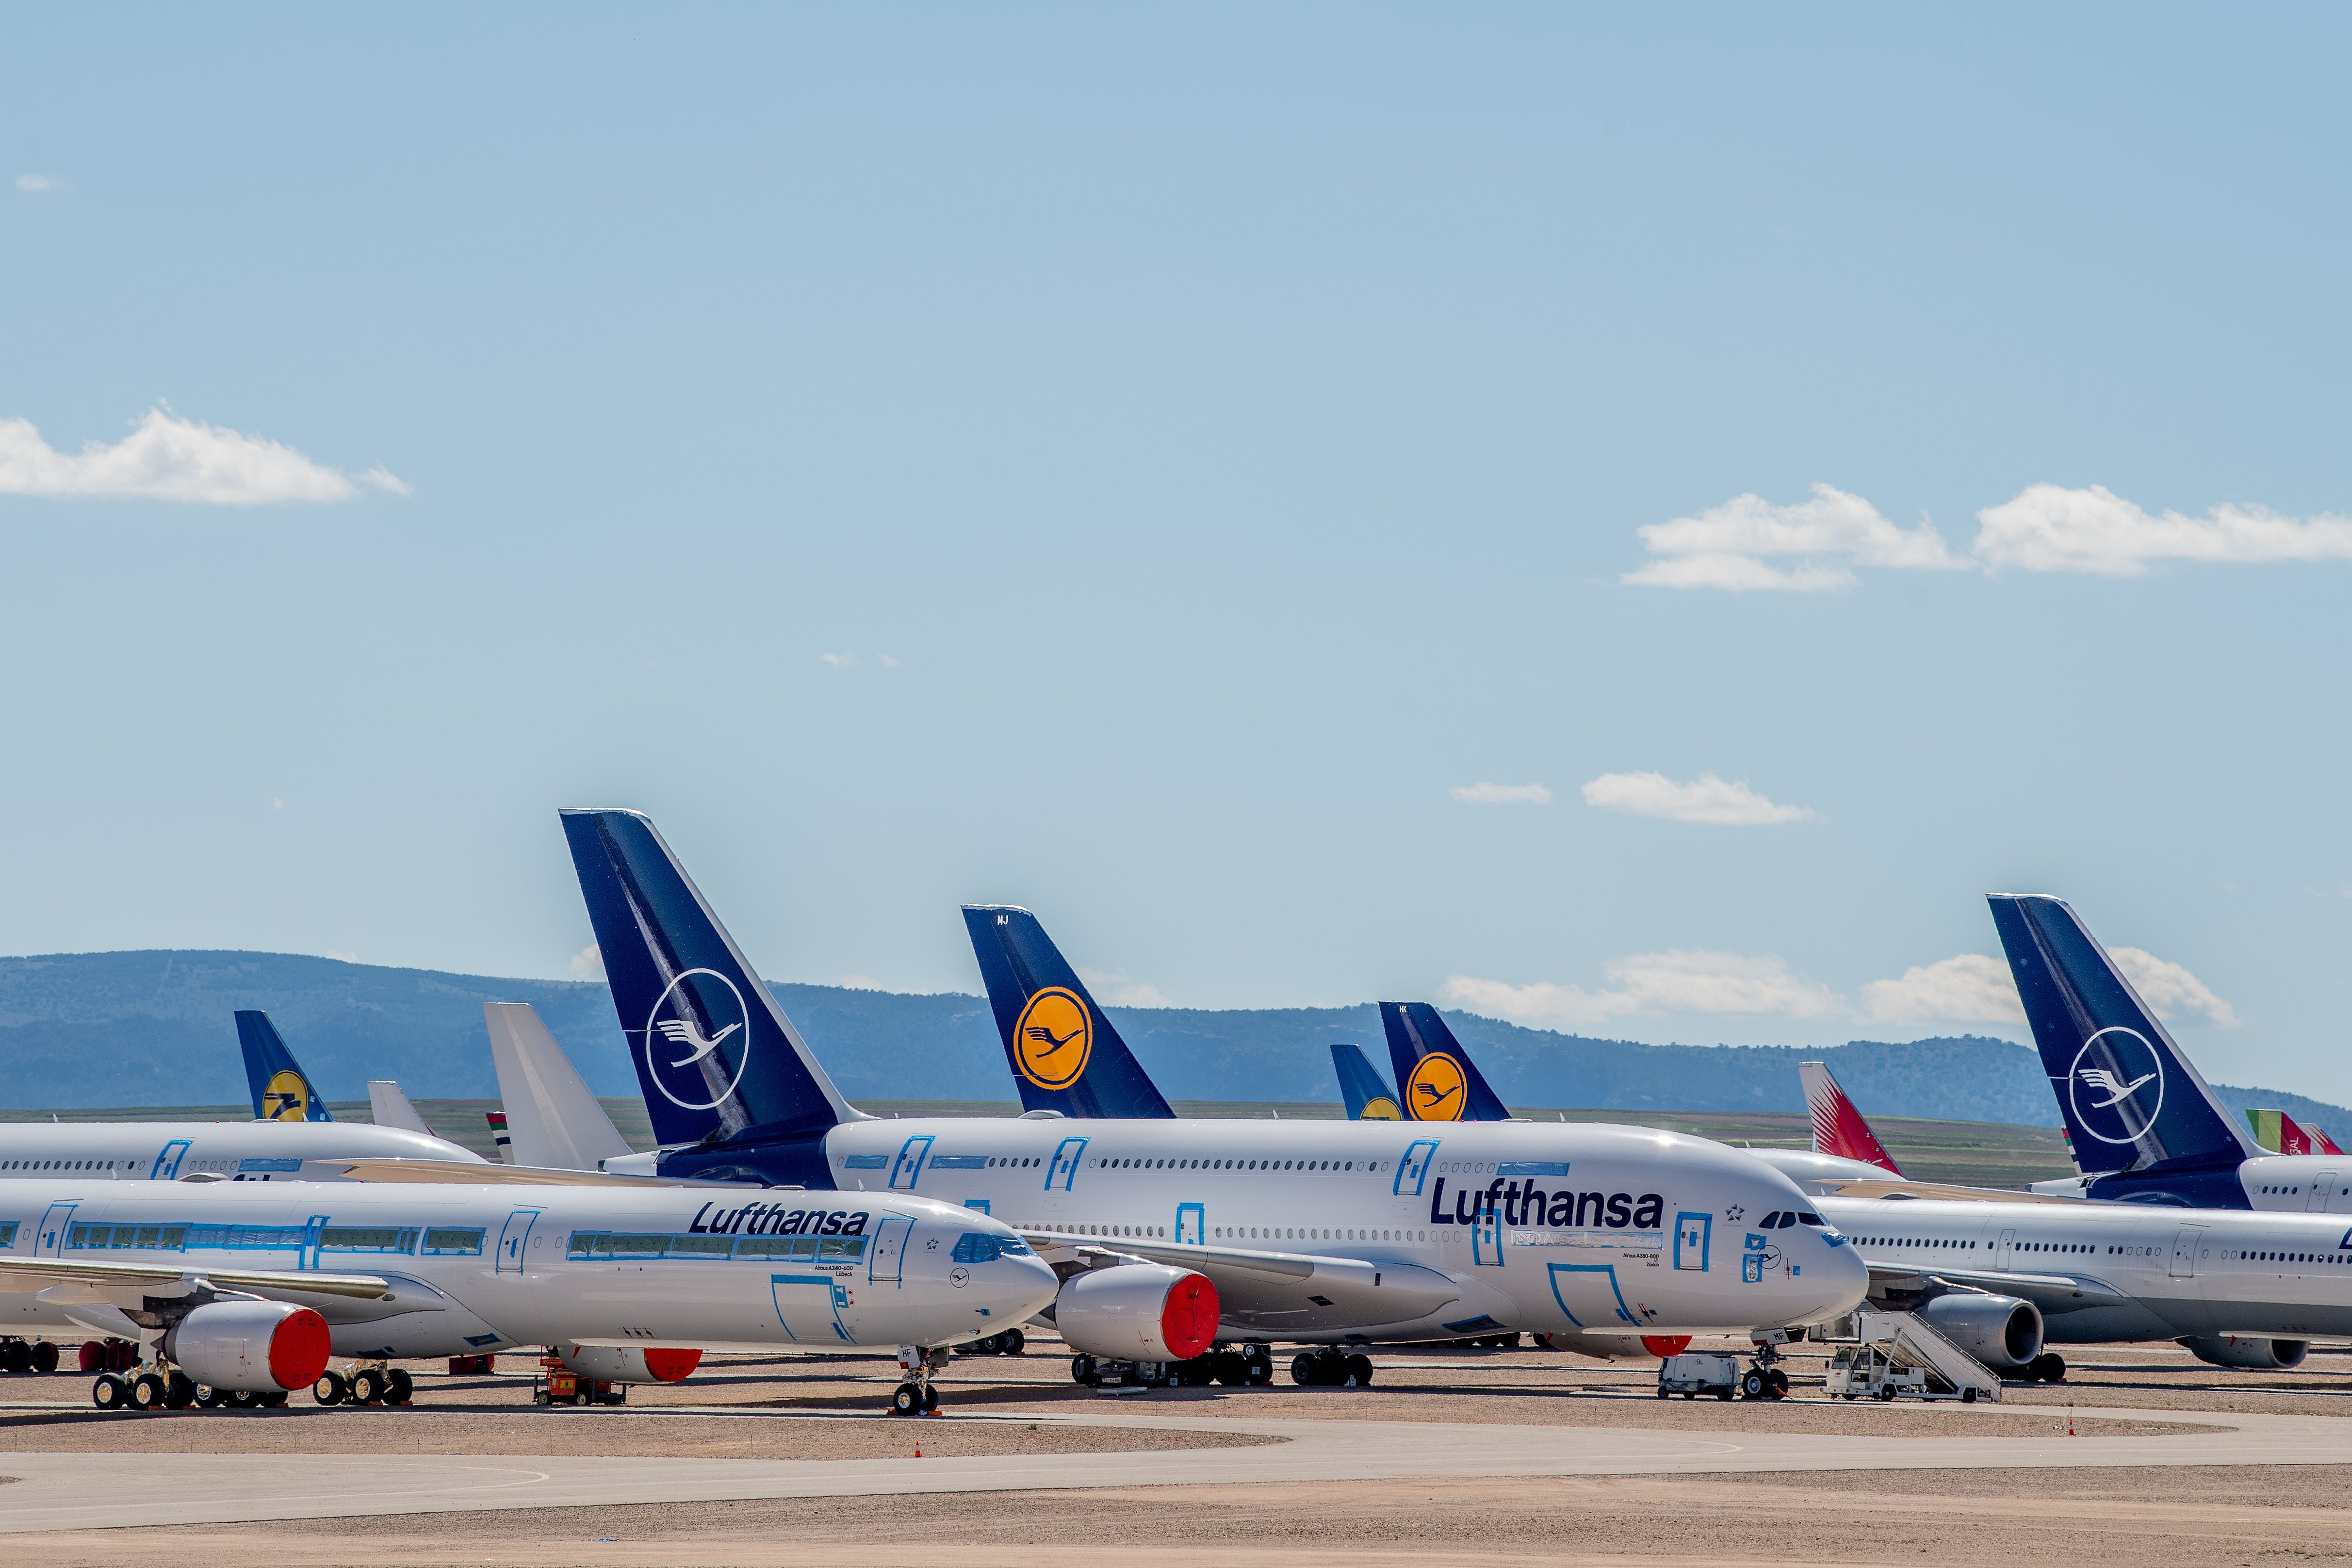 A Lufthansa Airbus A380 is shown wrapped up and protected from the elements, surrounded by other stored aircraft in Teruel, Spain.